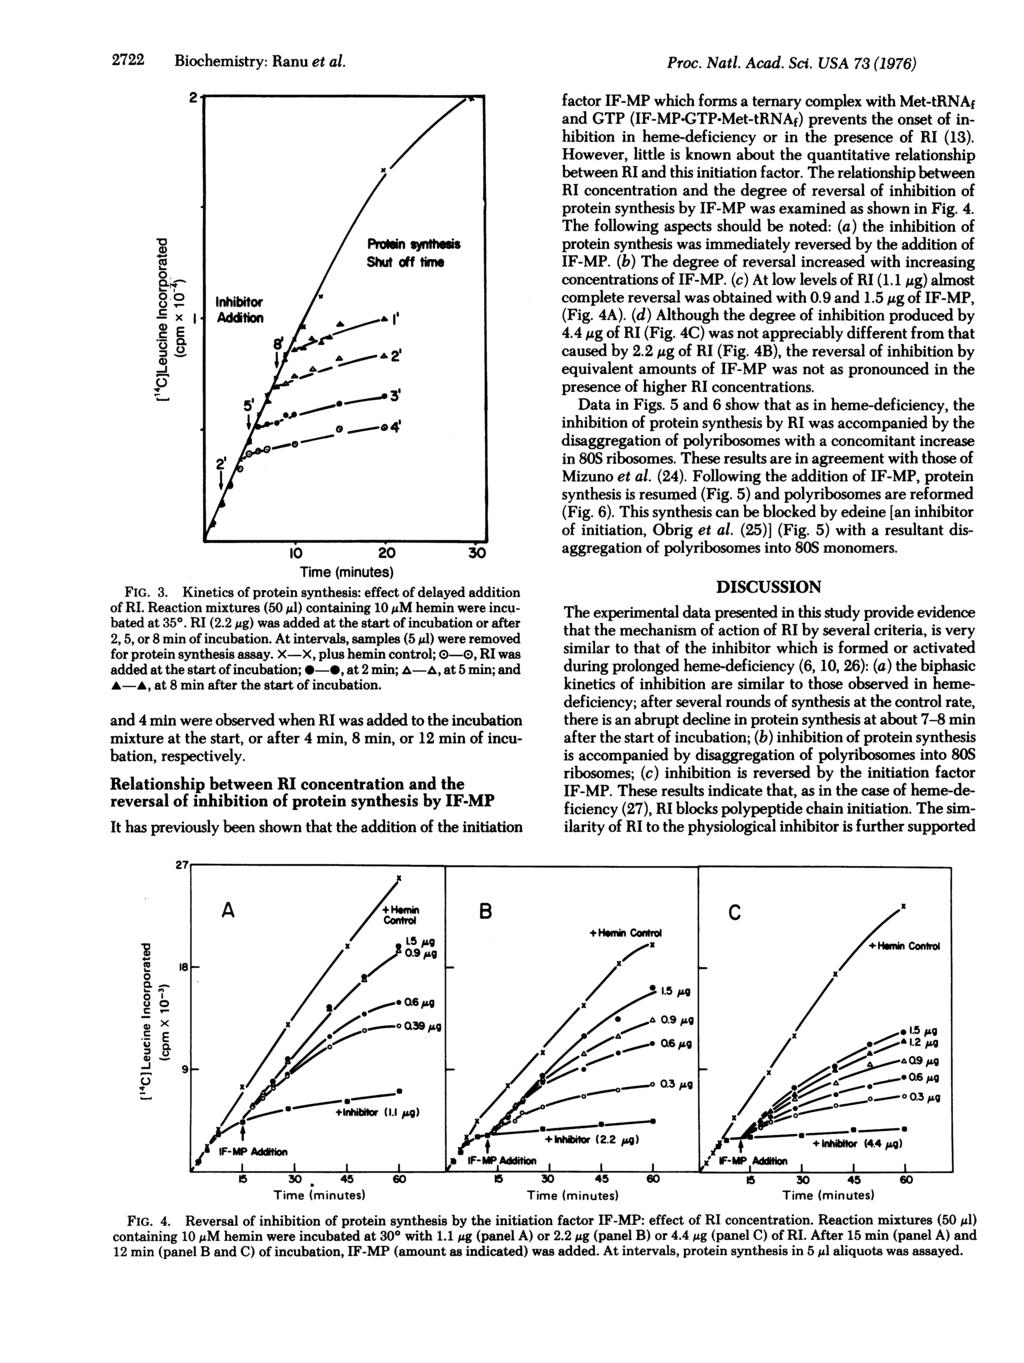 2722 Biochemistry: Ranu et al. 0)/ Prolin synthesis co Shut offtine O. 0. Inhibitor x I Addtion.) 4 10 20 30 FIG. 3. Kinetics of protein synthesis: effect of delayed addition of RI.